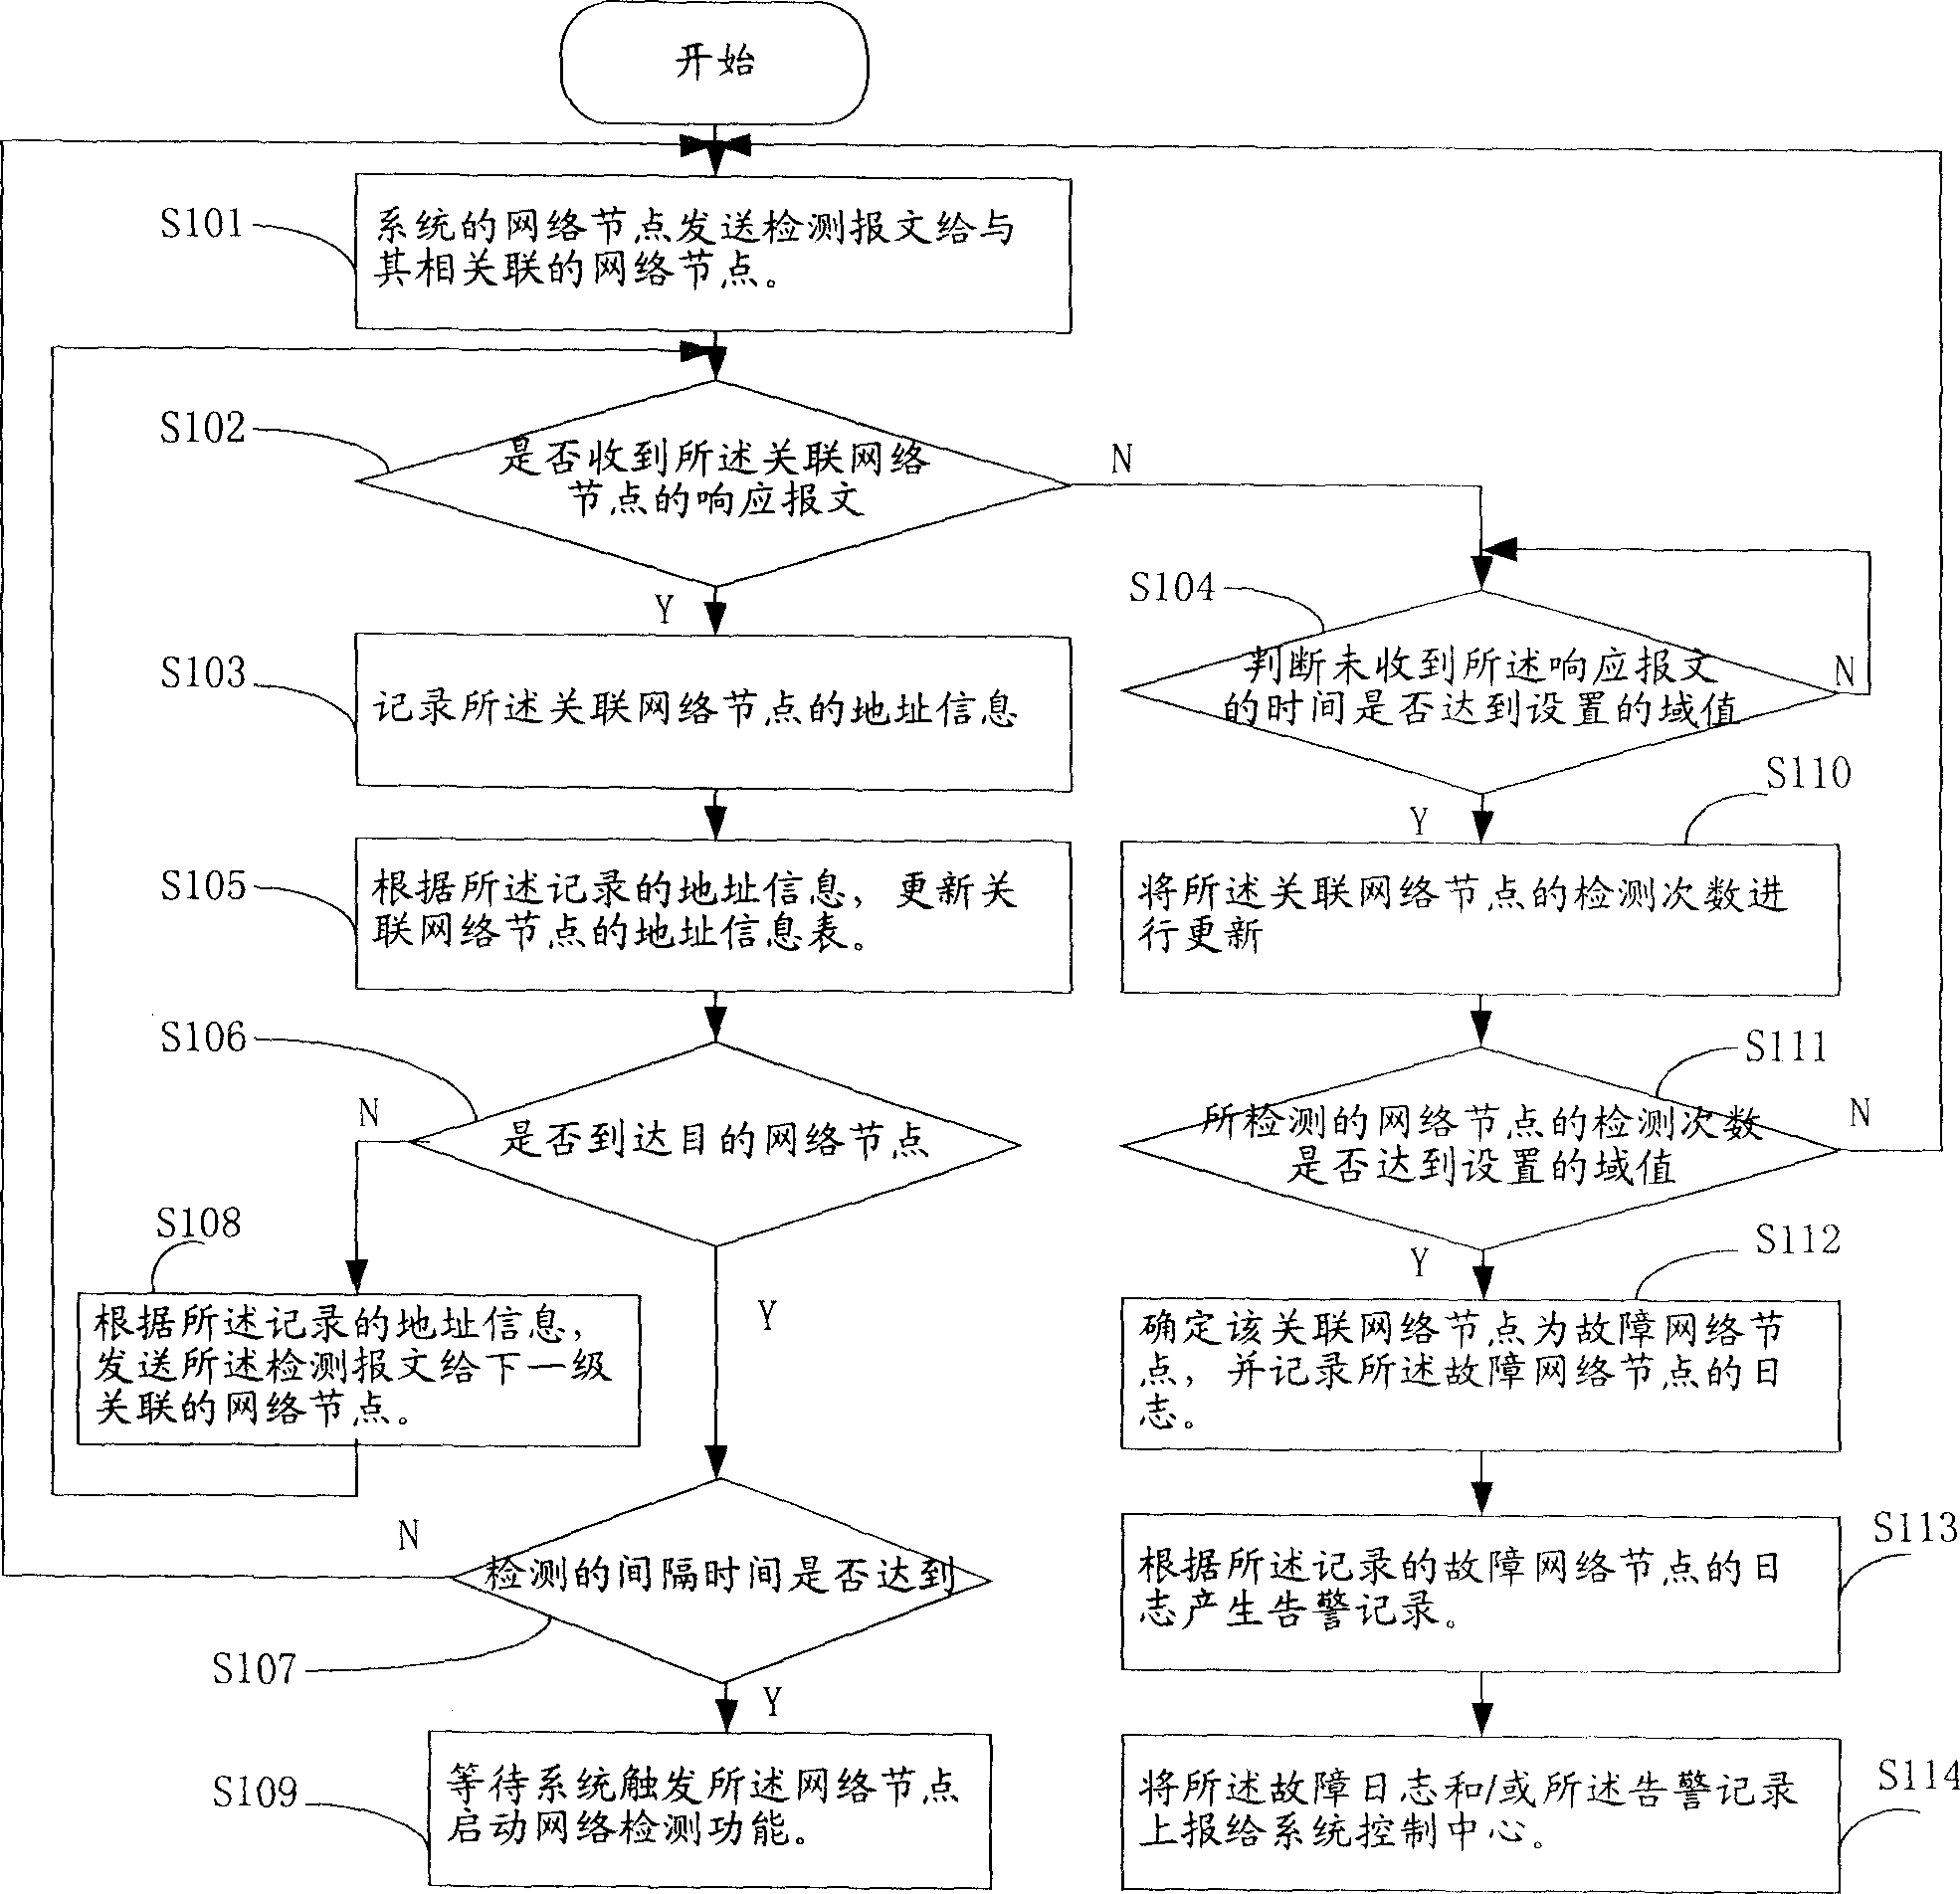 Method for recognizing failure node in network